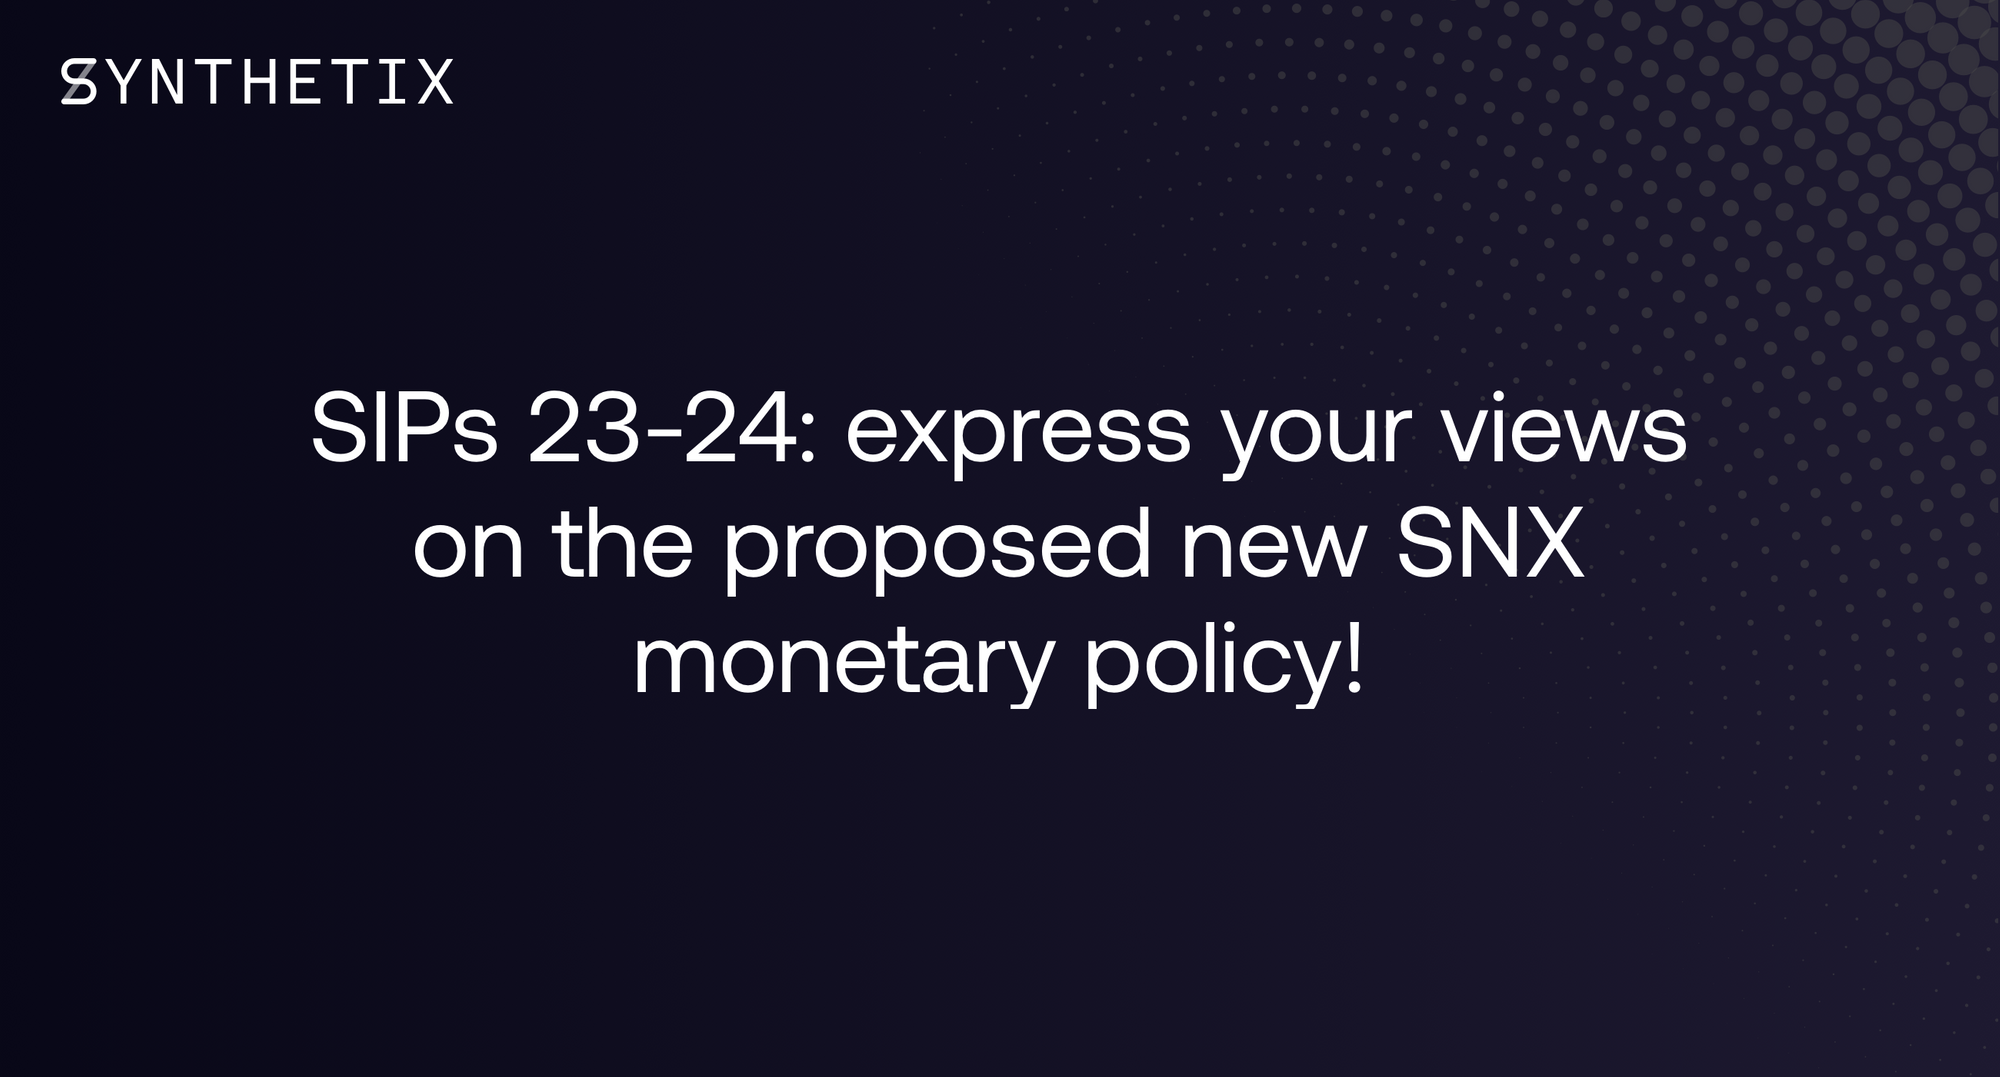 SIPs 23-24: express your views on the proposed new SNX monetary policy!